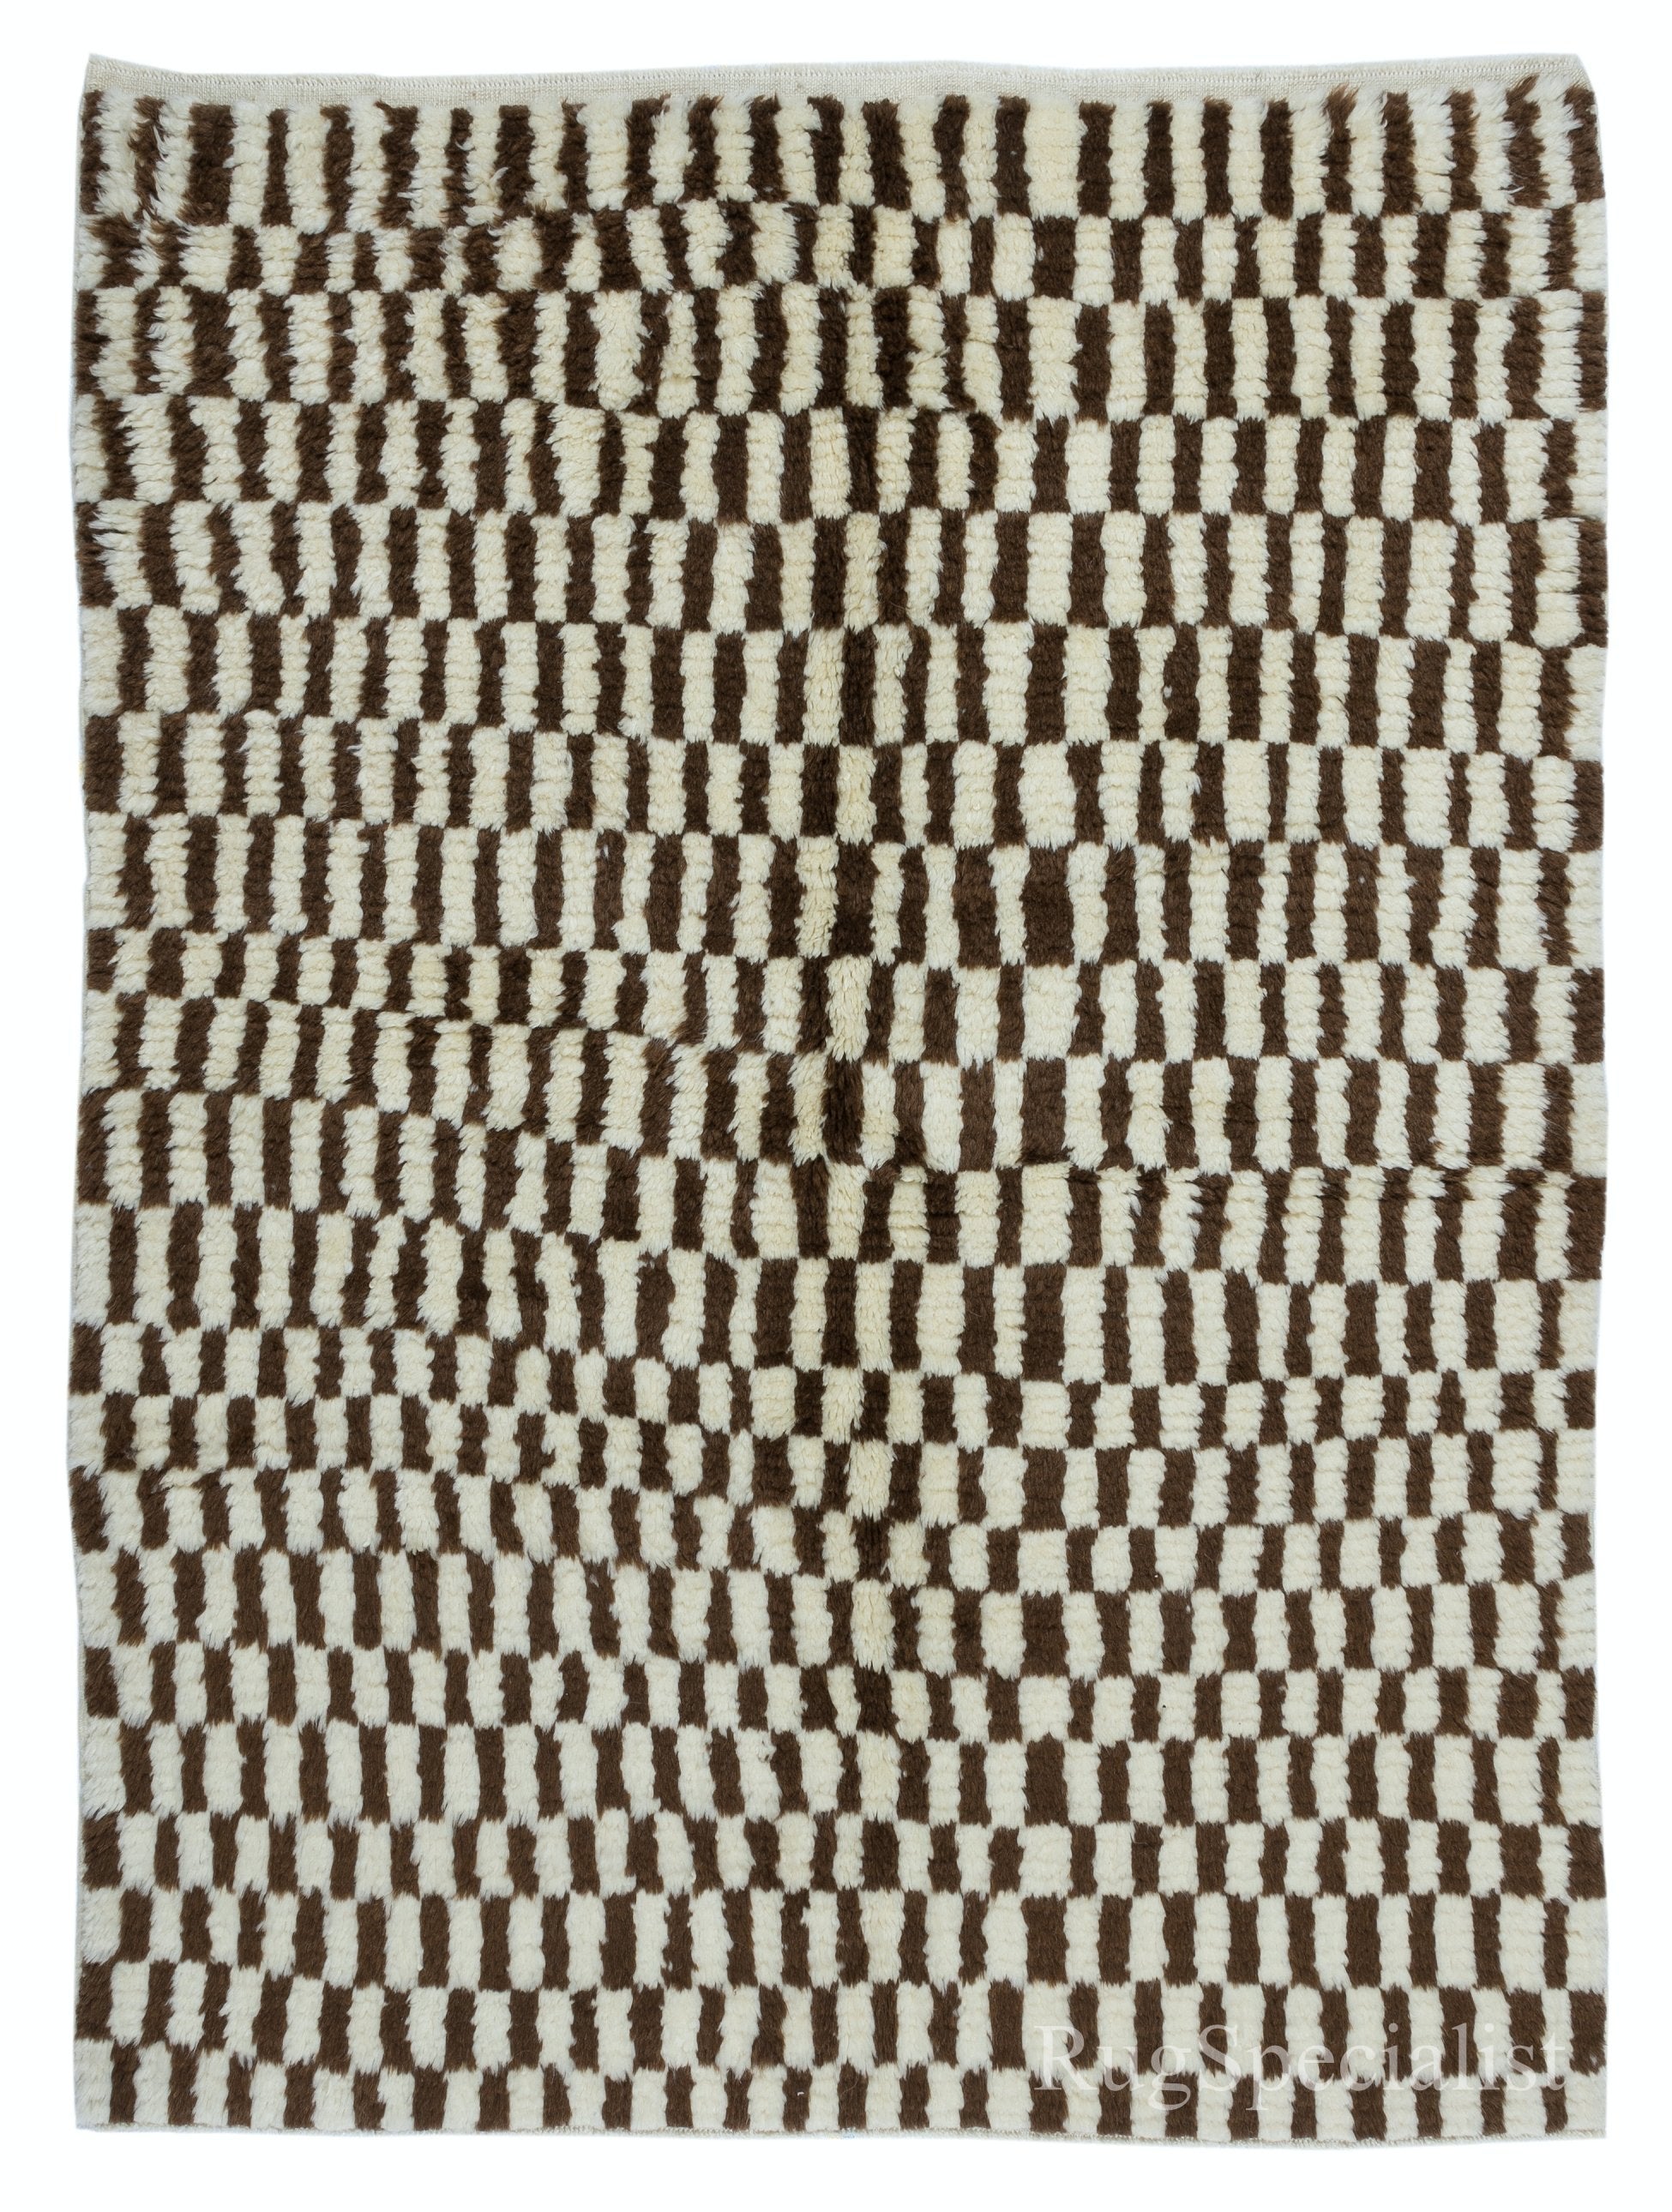 5x6.4 Ft Modern Hand Knotted Checkered Tulu Rug in Brown & Beige. All Wool For Sale